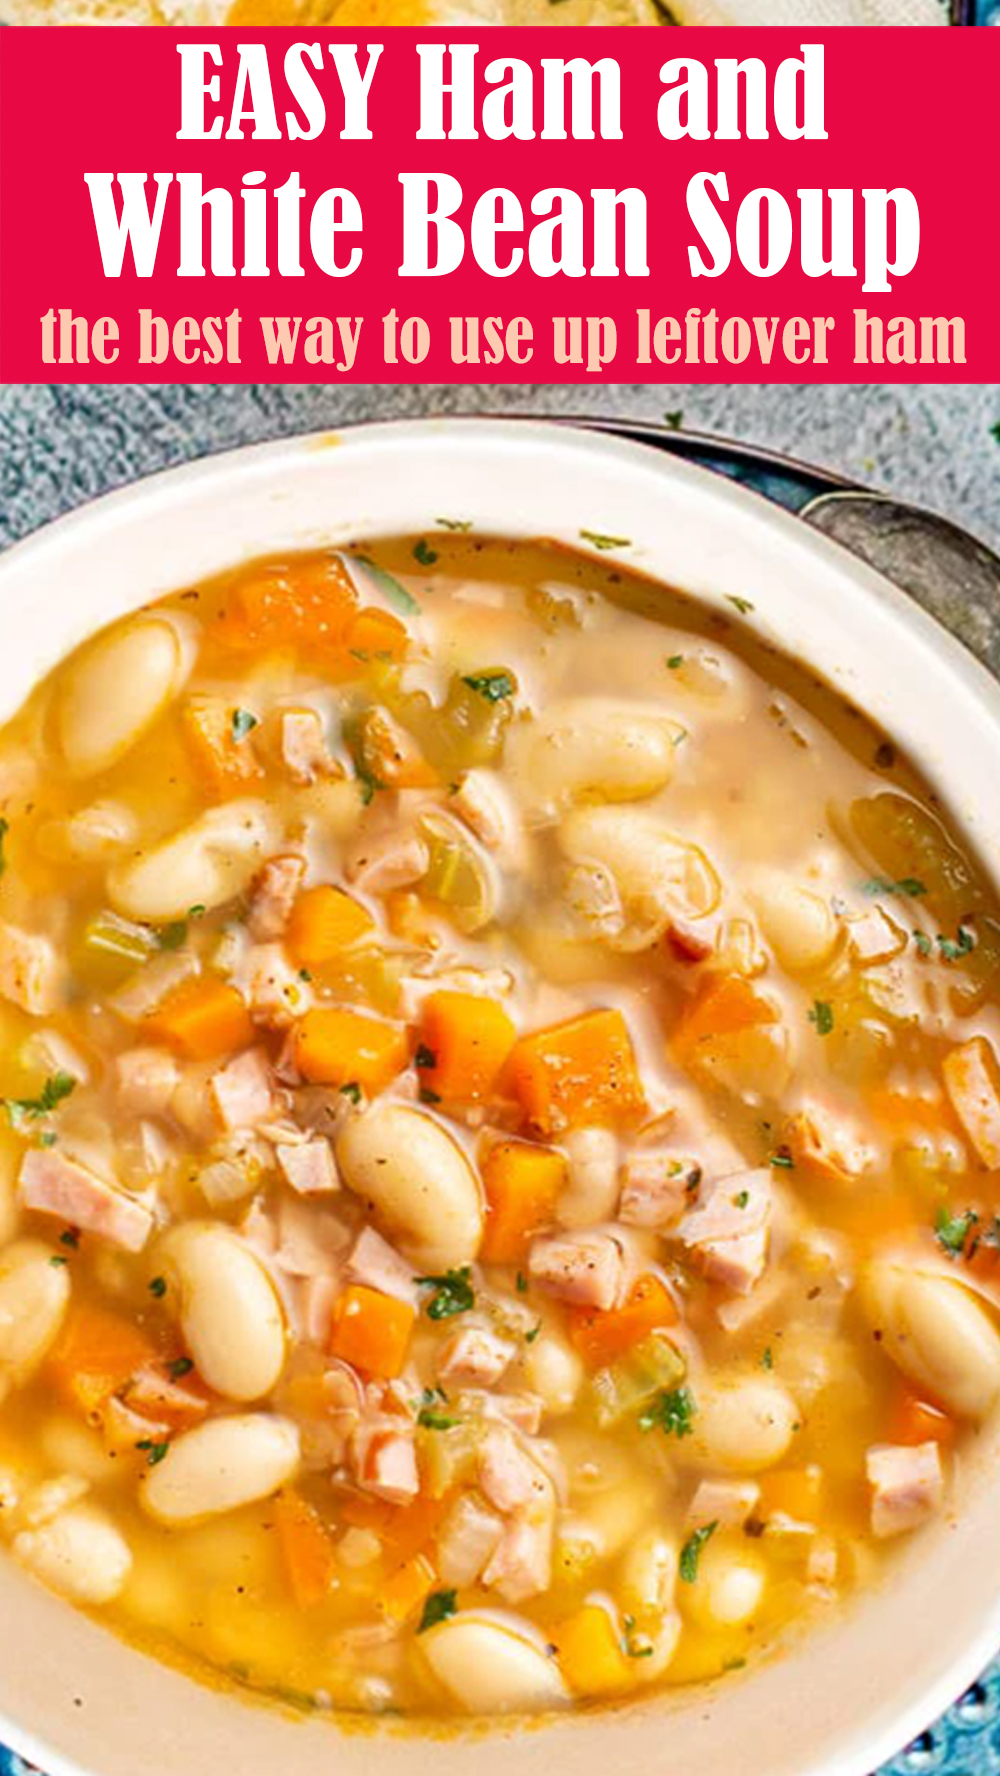 EASY Ham and White Bean Soup